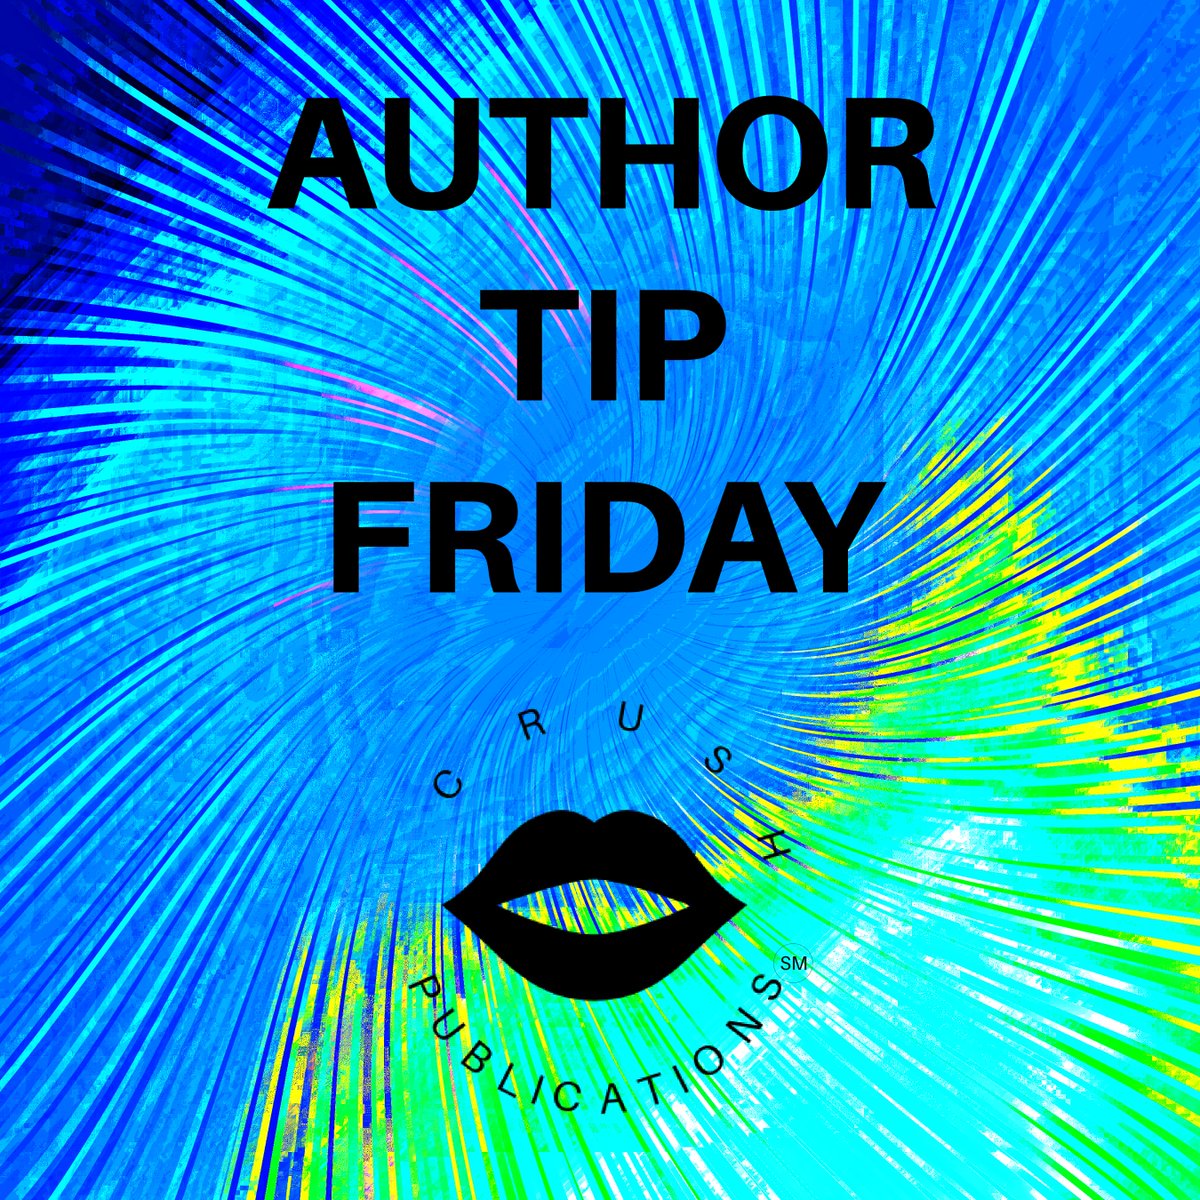 Author Tip Friday To hit WSJournal Best Seller list you need 6,000 sales in 1 week (Monday - Sunday) Pre-Orders do count in the sale count for opening week